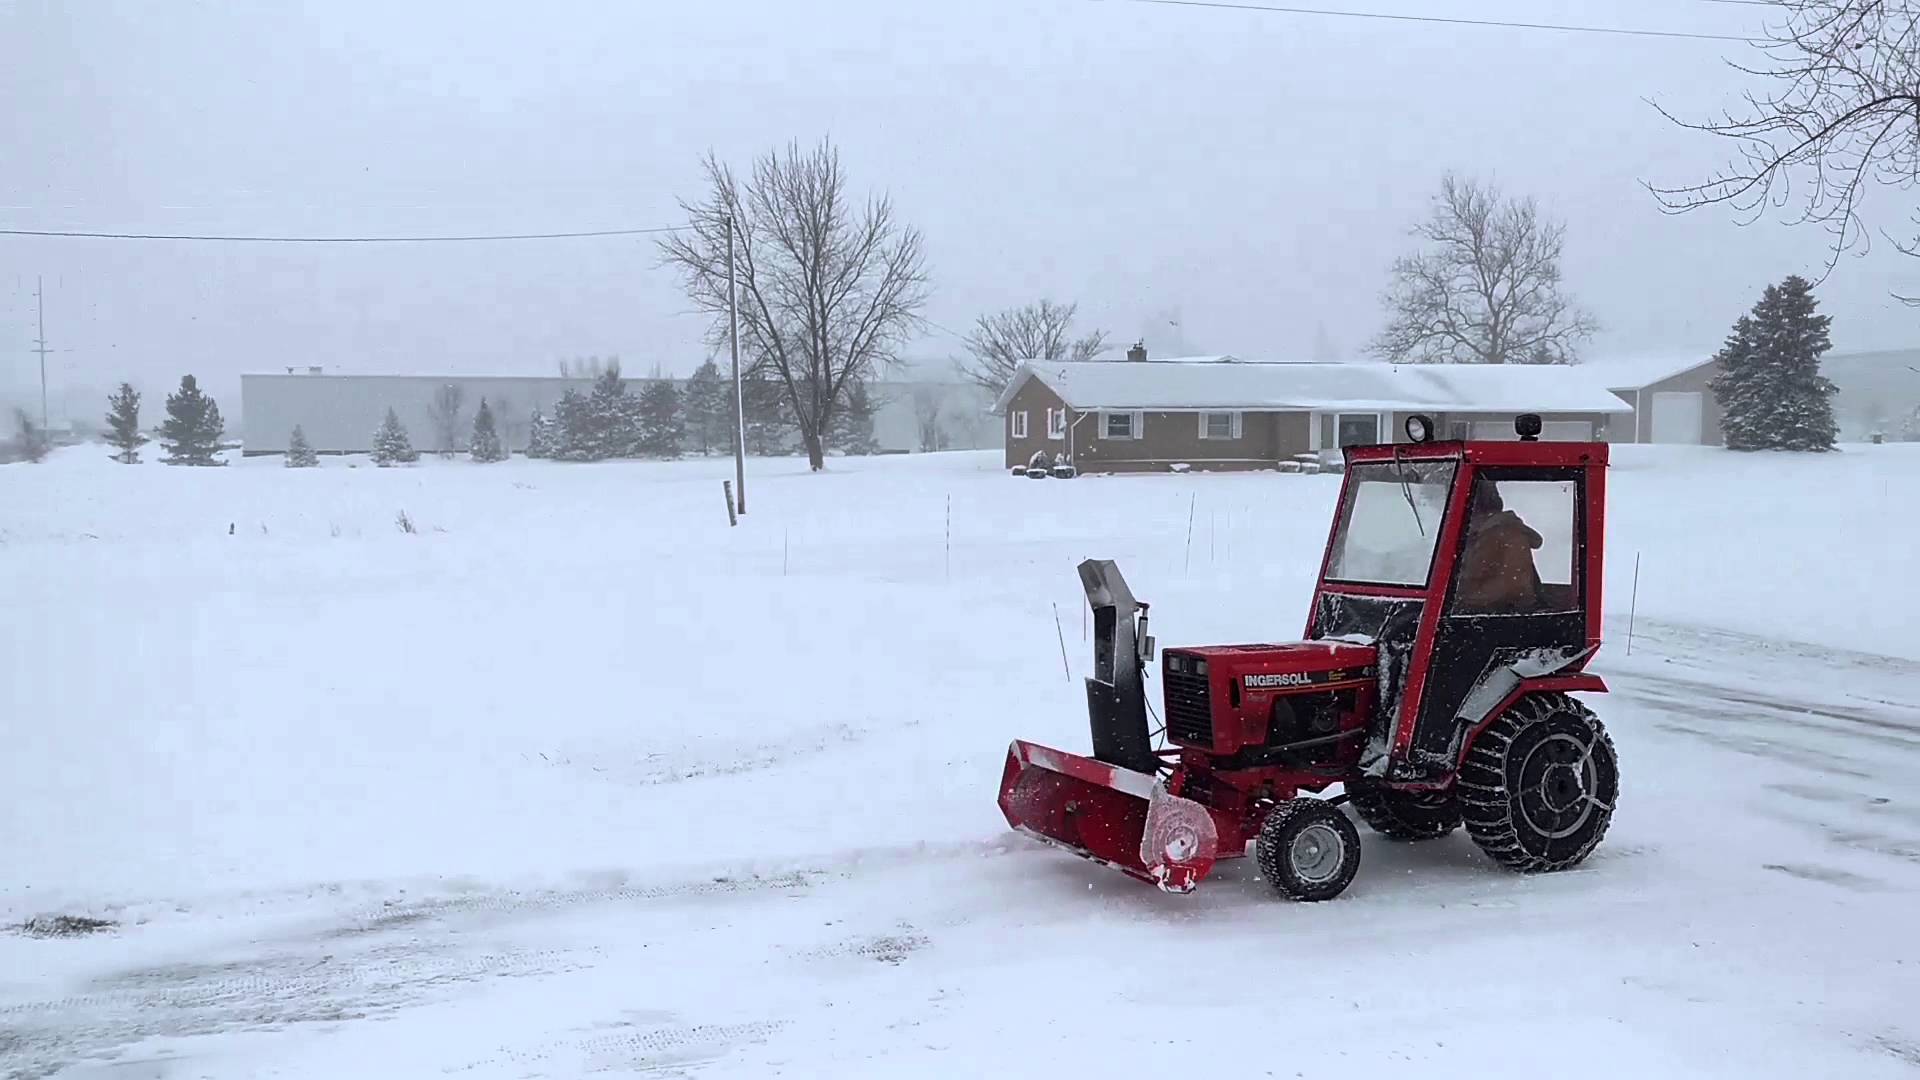 Ingersoll 4118D Blowing Snow Hydraulic Snow Blower - YouTube